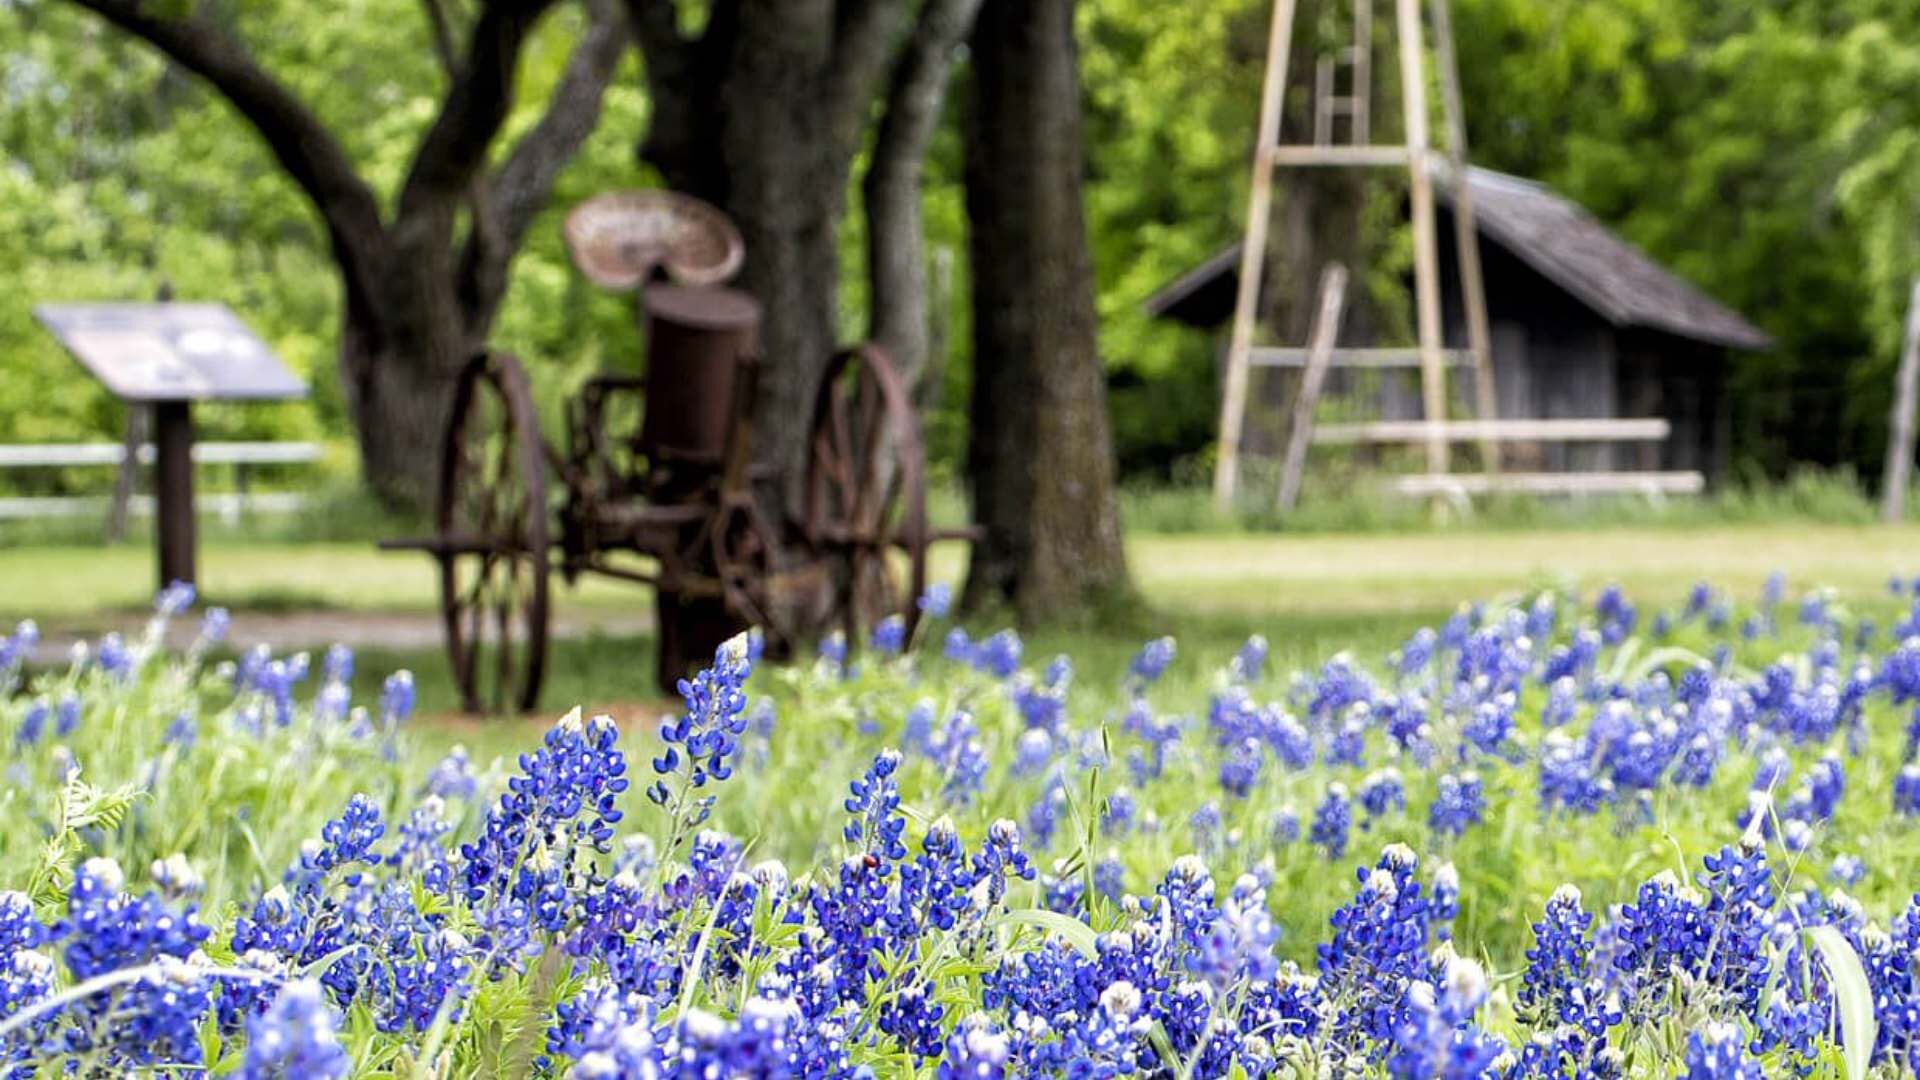 Close up view of blue flowers with an antique tractor, barn, and trees in the background